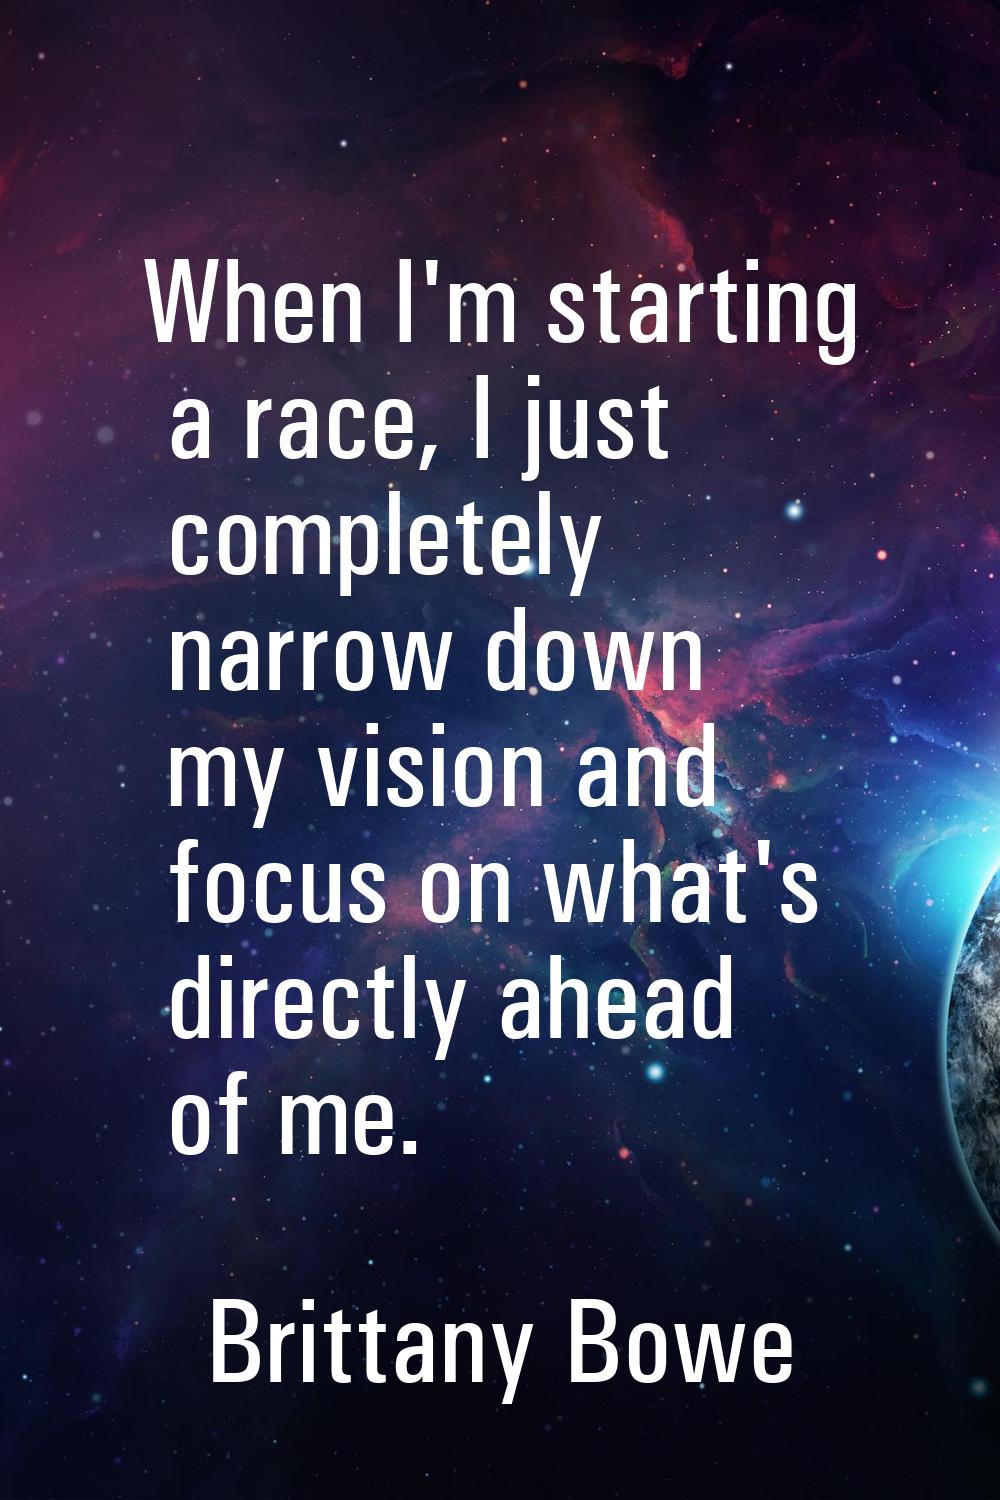 When I'm starting a race, I just completely narrow down my vision and focus on what's directly ahea